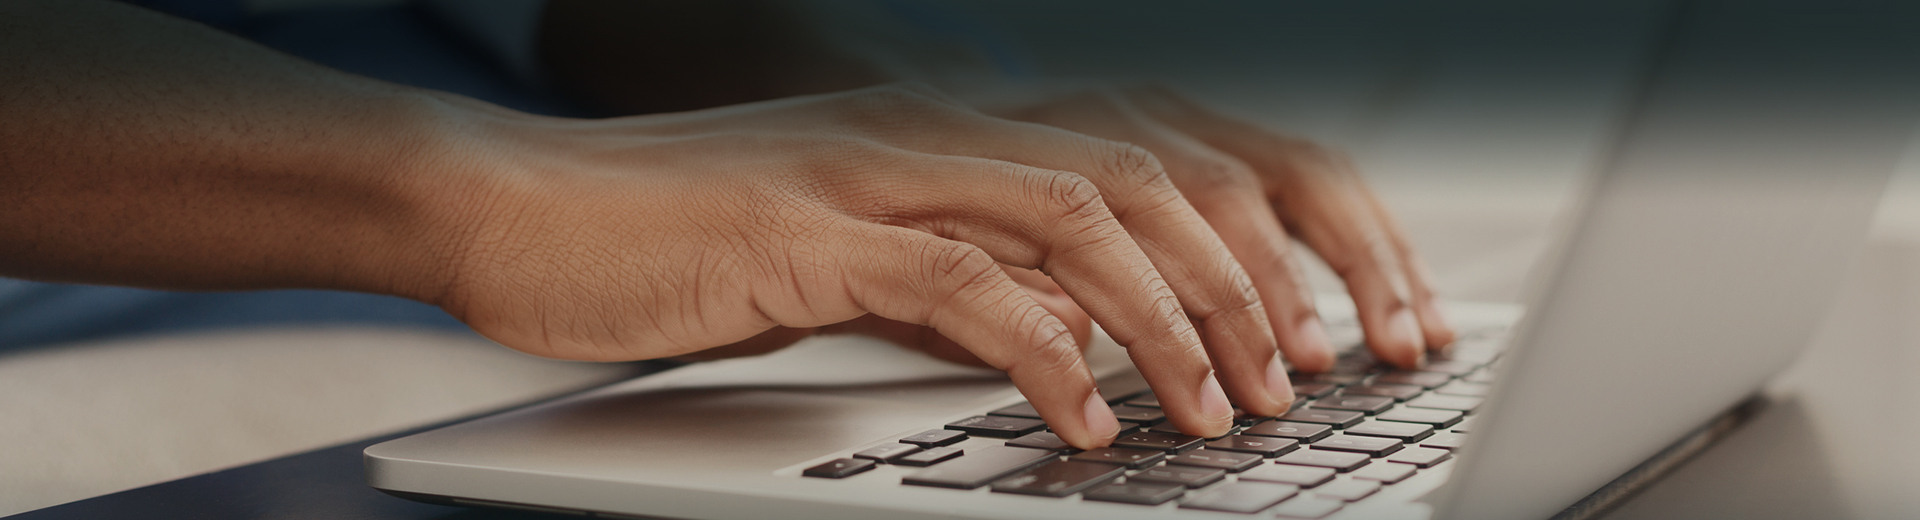 close up view of man hands typing in his laptop